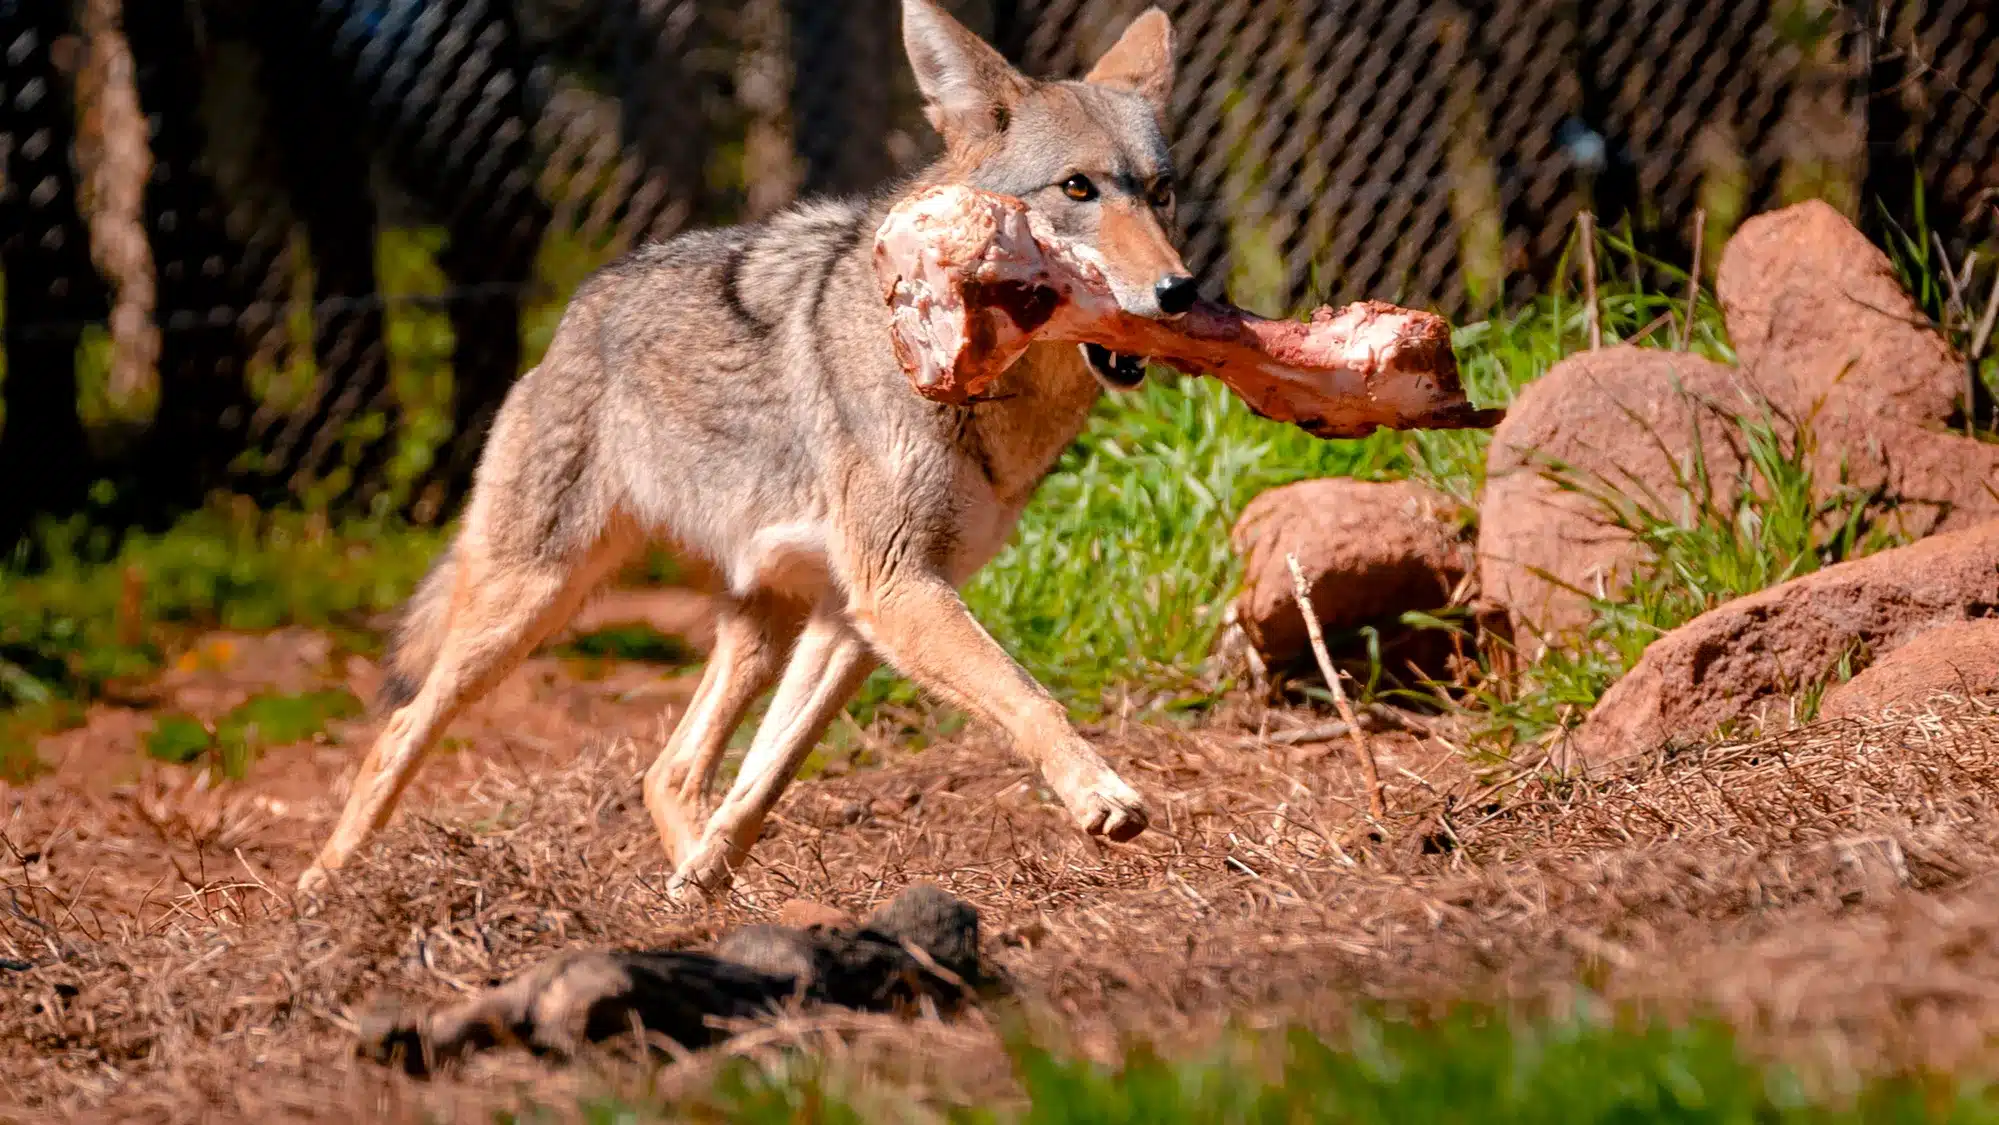 Can I Shoot a Coyote in My Yard?